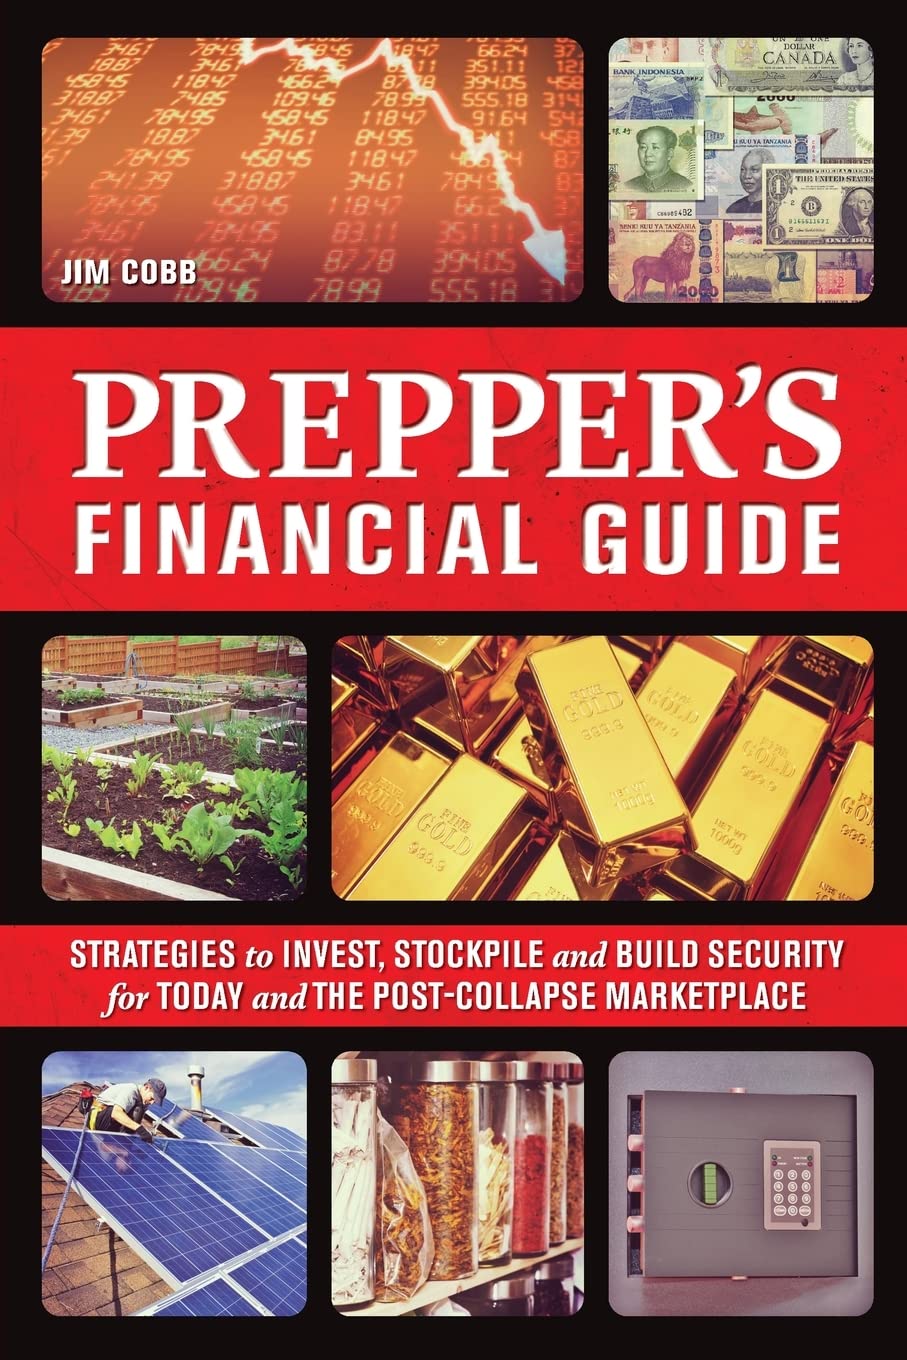 The Prepper’s Financial Guide: Strategies to Invest, Stockpile and Build Security for Today and the Post-Collapse Marketplace